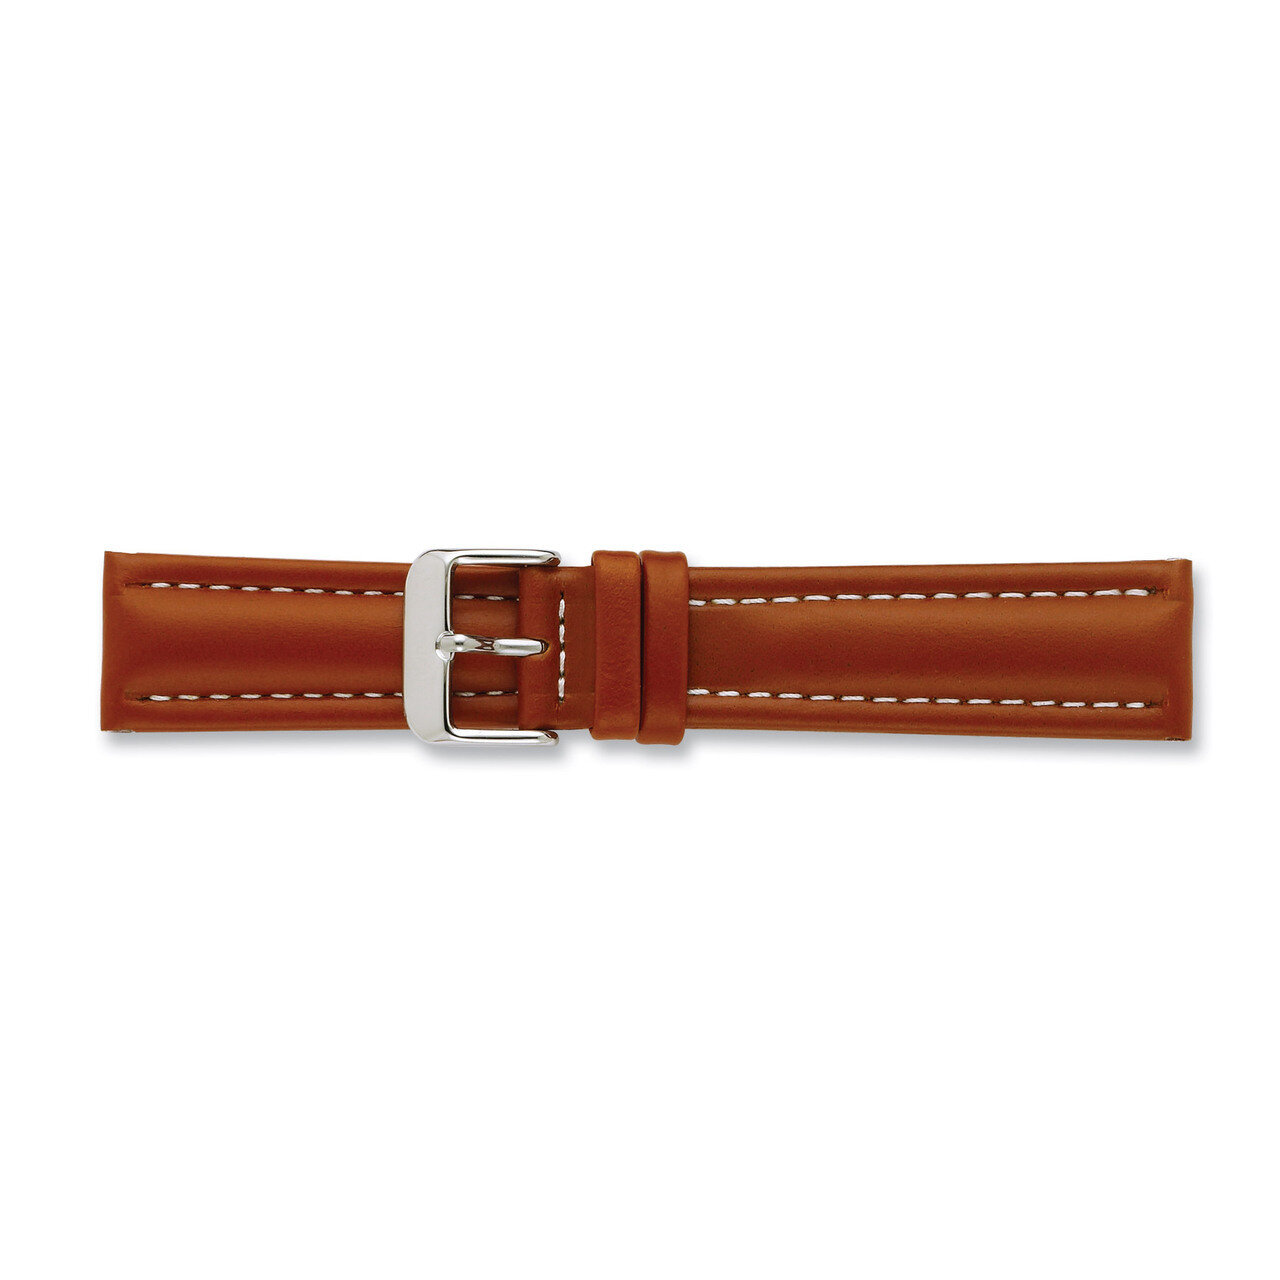 14mm Saddle Oil Tanned Leather Watch Band 6.75 Inch Silver-tone Buckle BAW194-14